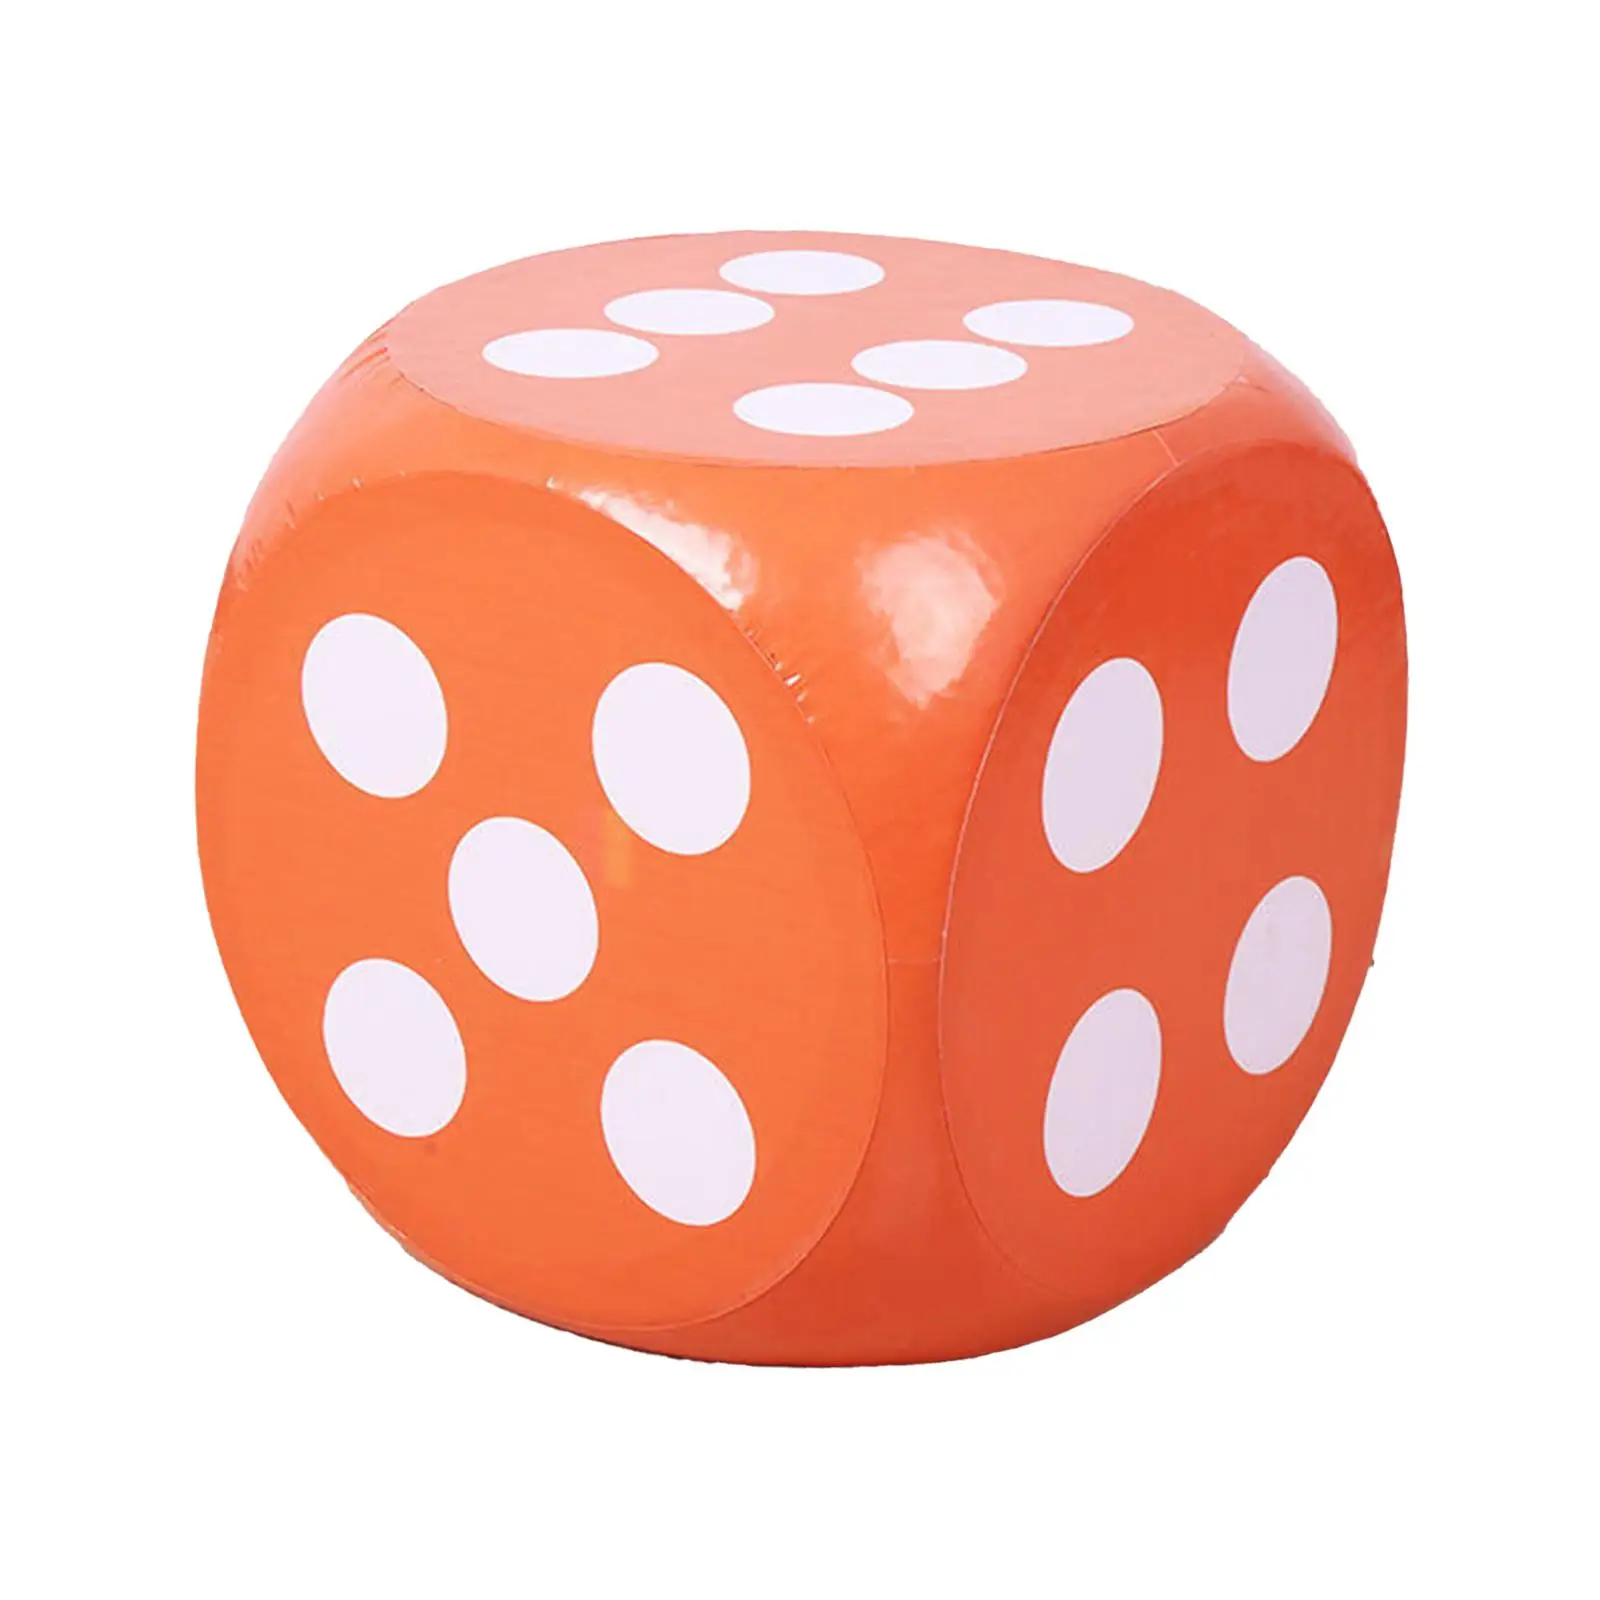 Soft Foam Jumbo Big Playing Dice Teaching Aids Learn Math Counting D6 12inch for Classroom Boys Girls Kids Children Party Favors